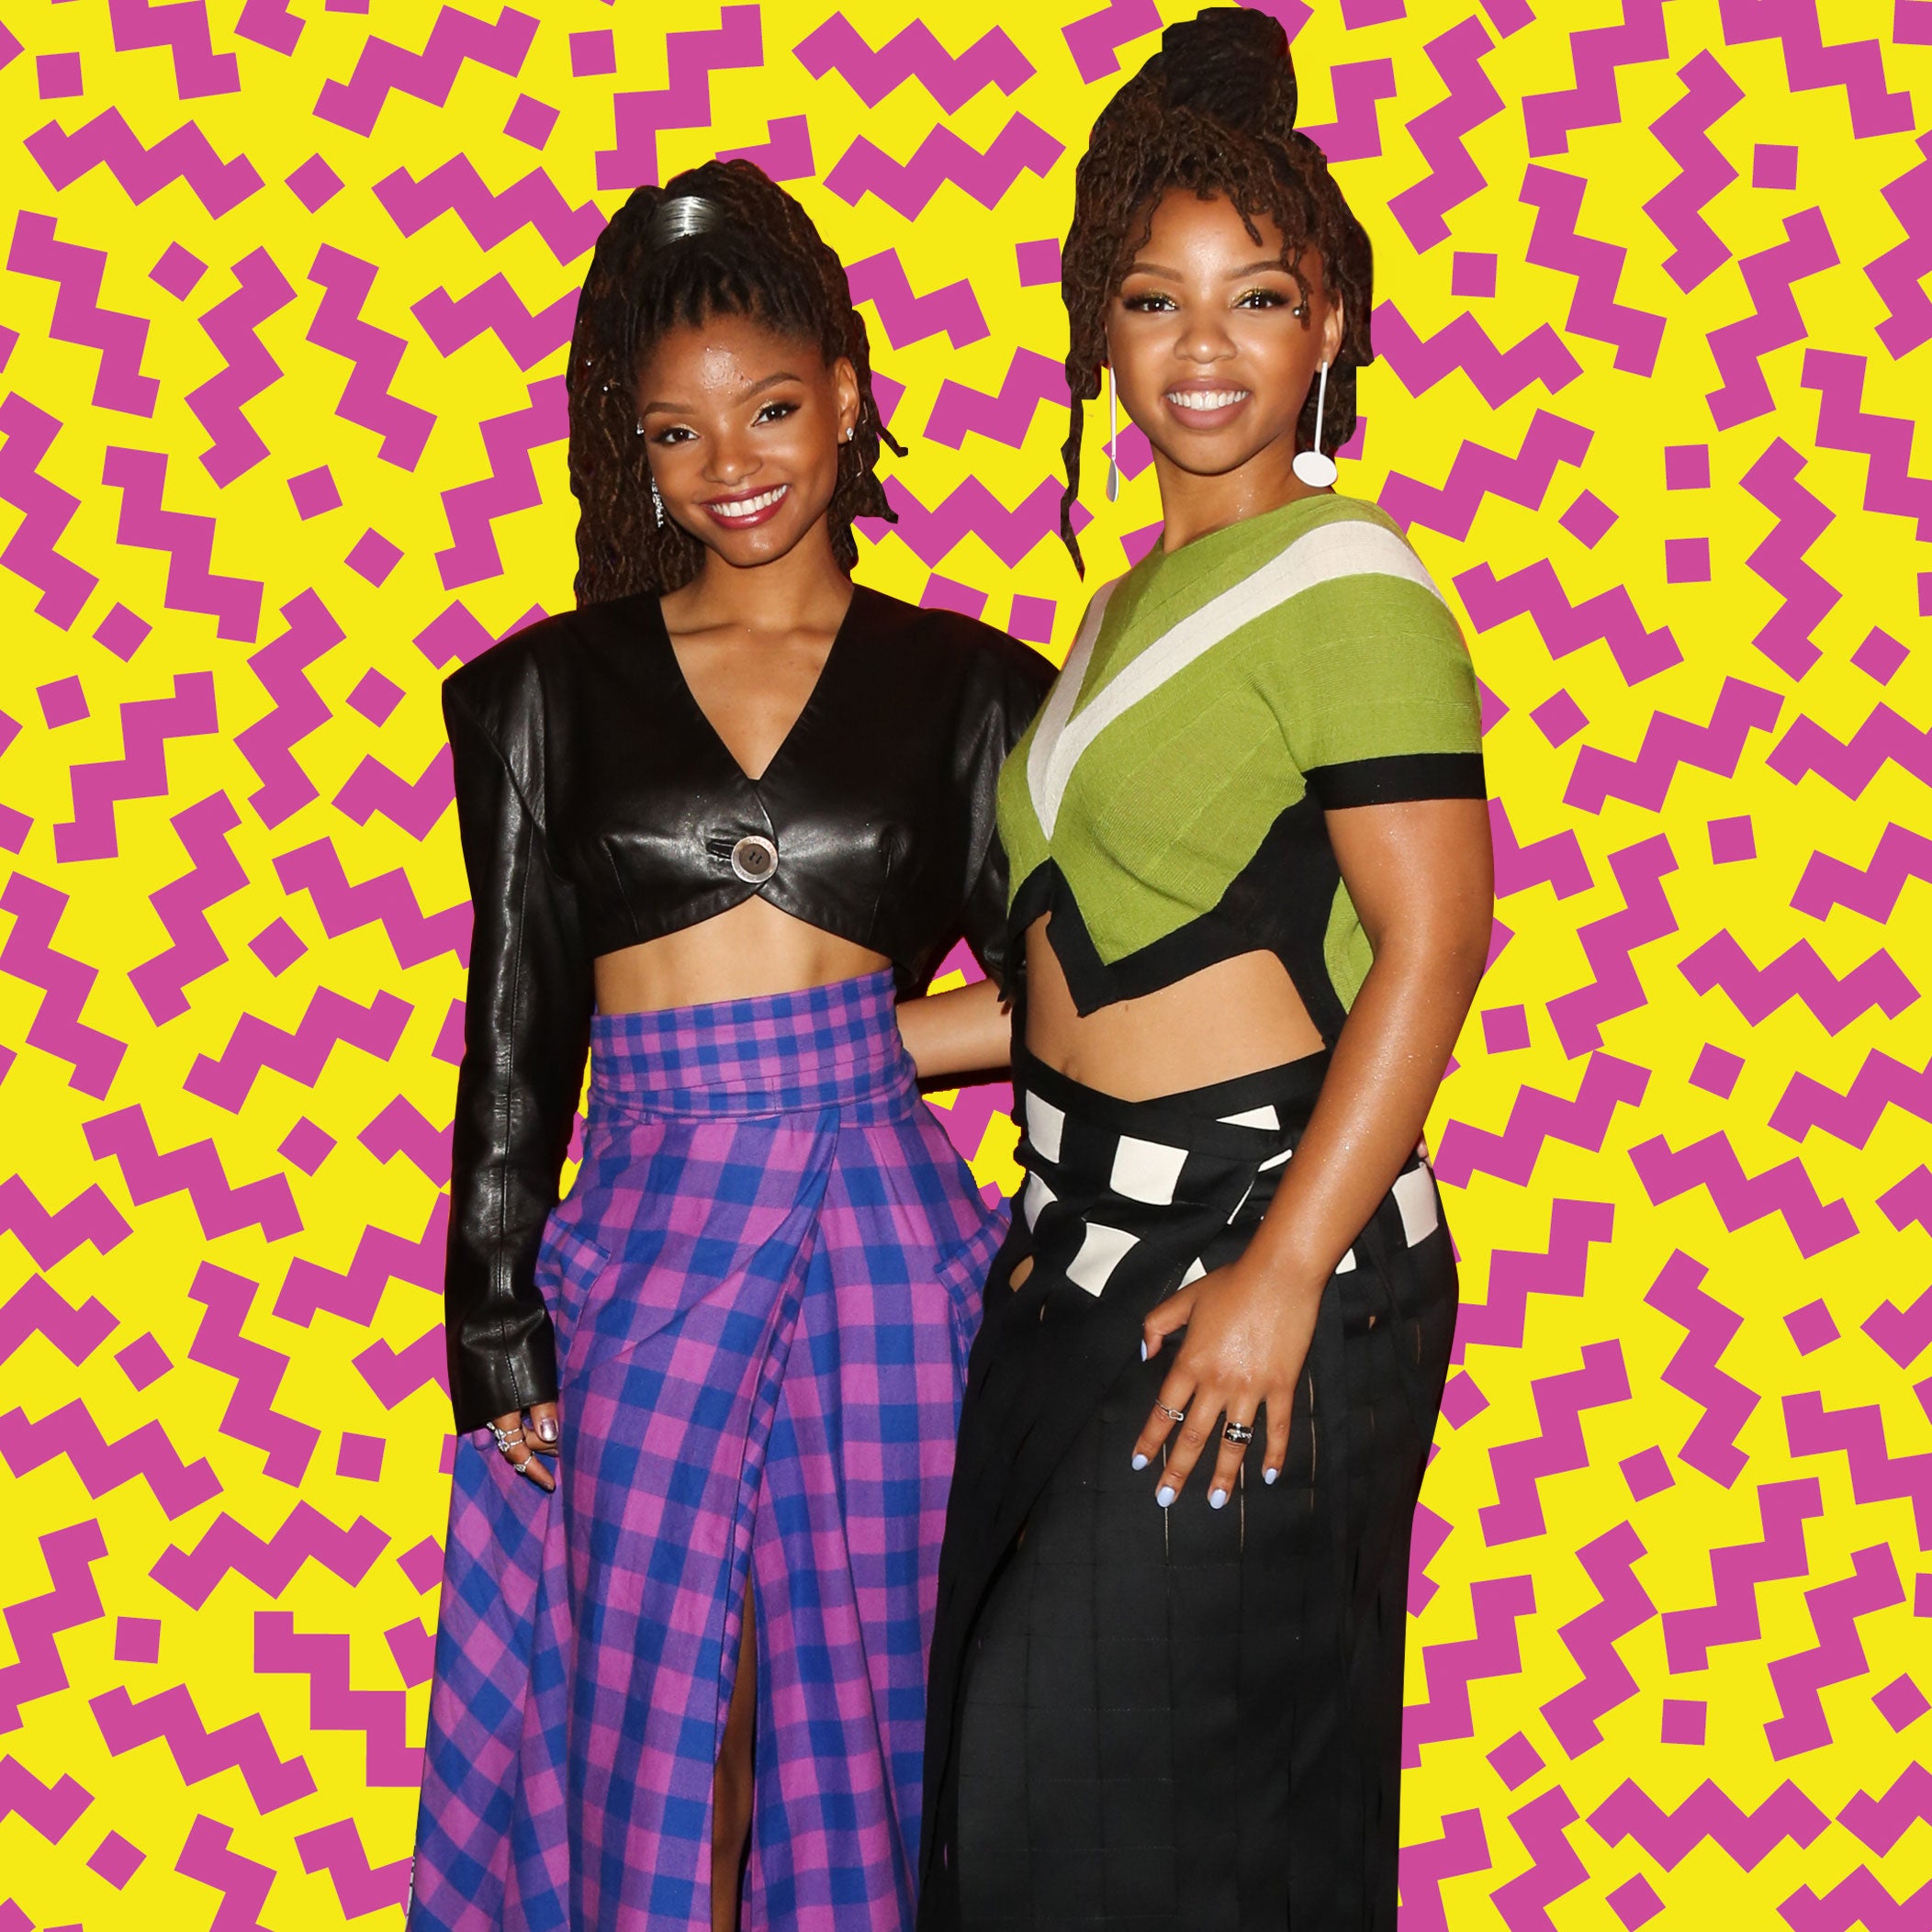 They Came To Slay, Sis! Chloe x Halle Prove That Their Fashion Sense Is Grown-ish Too! 
